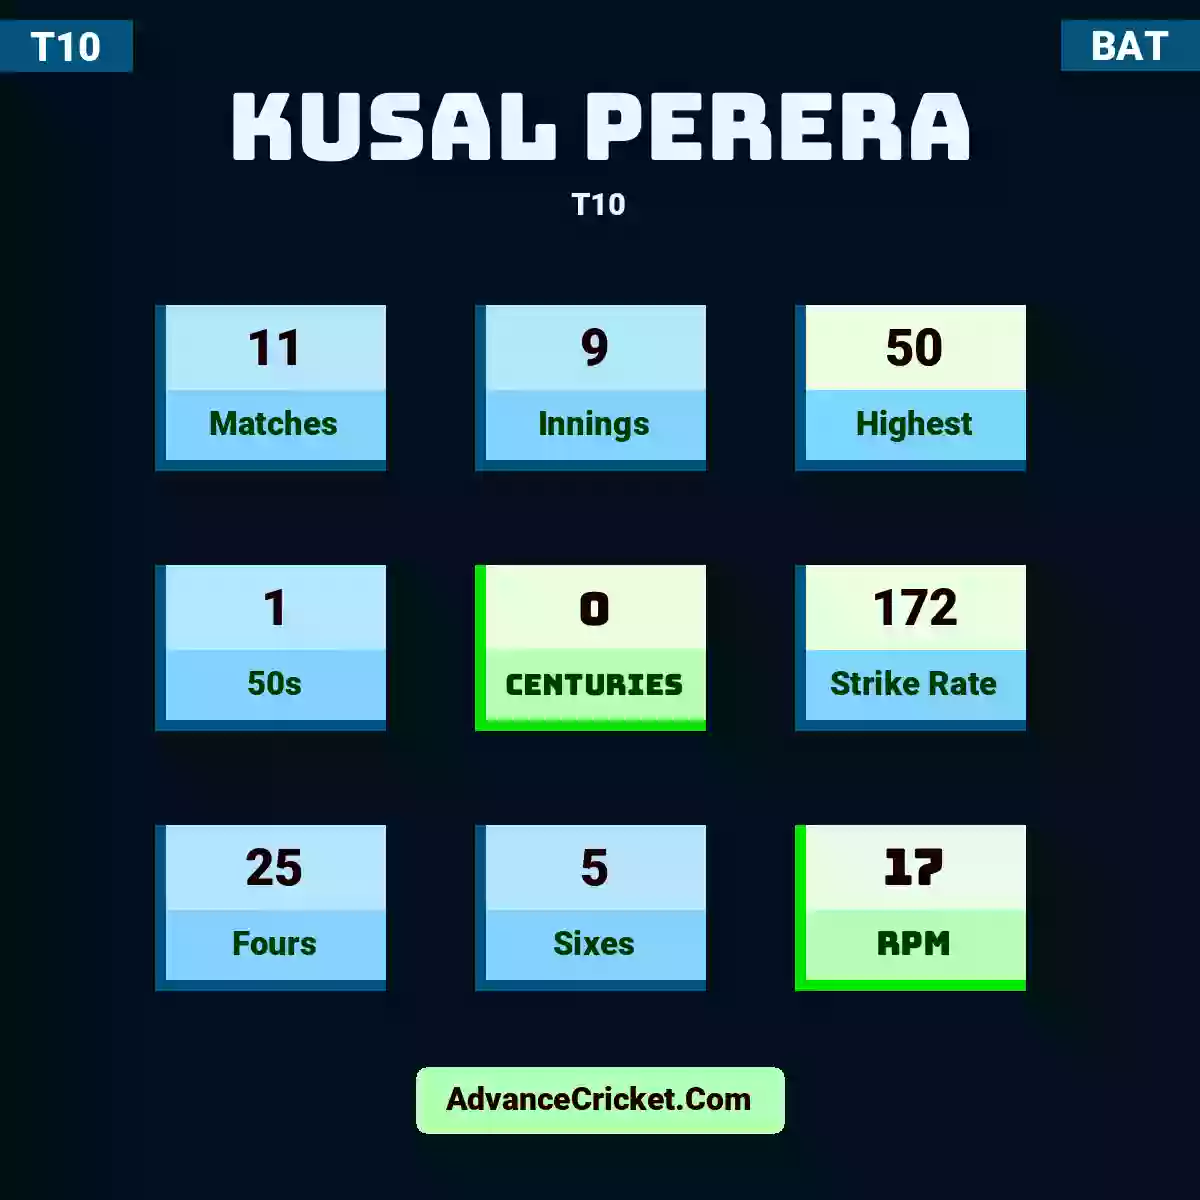 Kusal Perera T10 , Kusal Perera played 11 matches, scored 50 runs as highest, 1 half-centuries, and 0 centuries, with a strike rate of 172. K.Perera hit 25 fours and 5 sixes, with an RPM of 17.